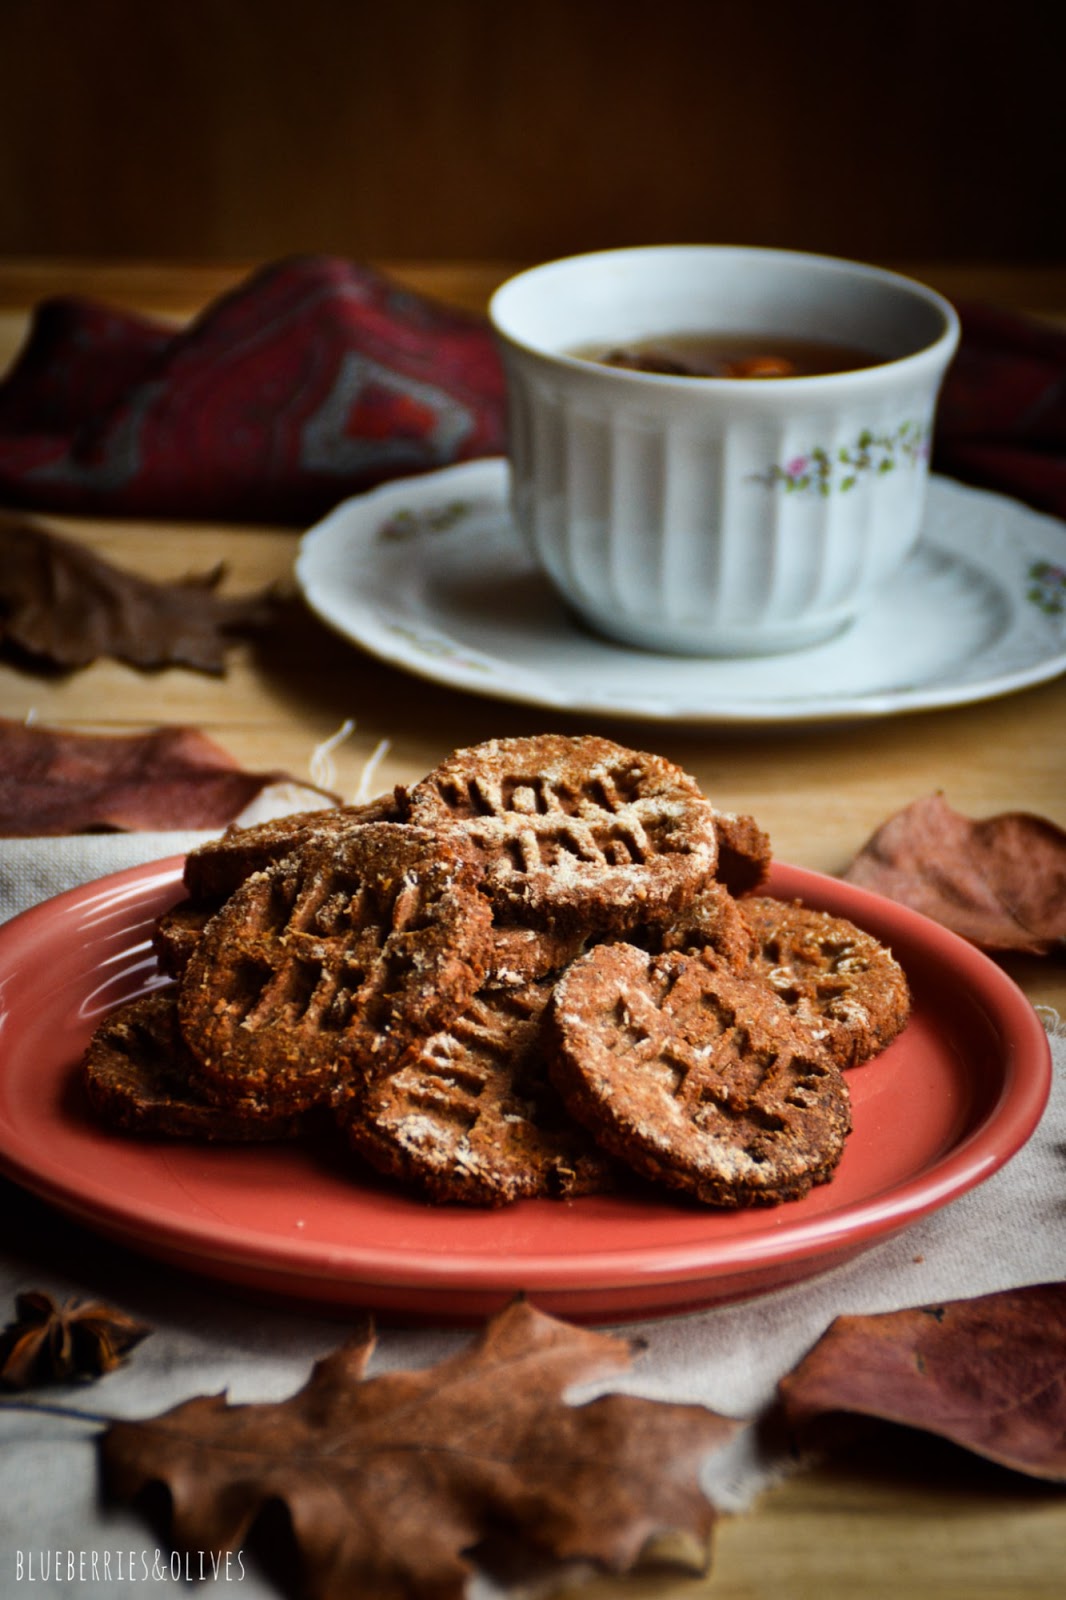 Homemade cookies on red ceramic dish, dark background, old wood, piles books with red apple on top, porcelain mug with tea, star anise and orange peels